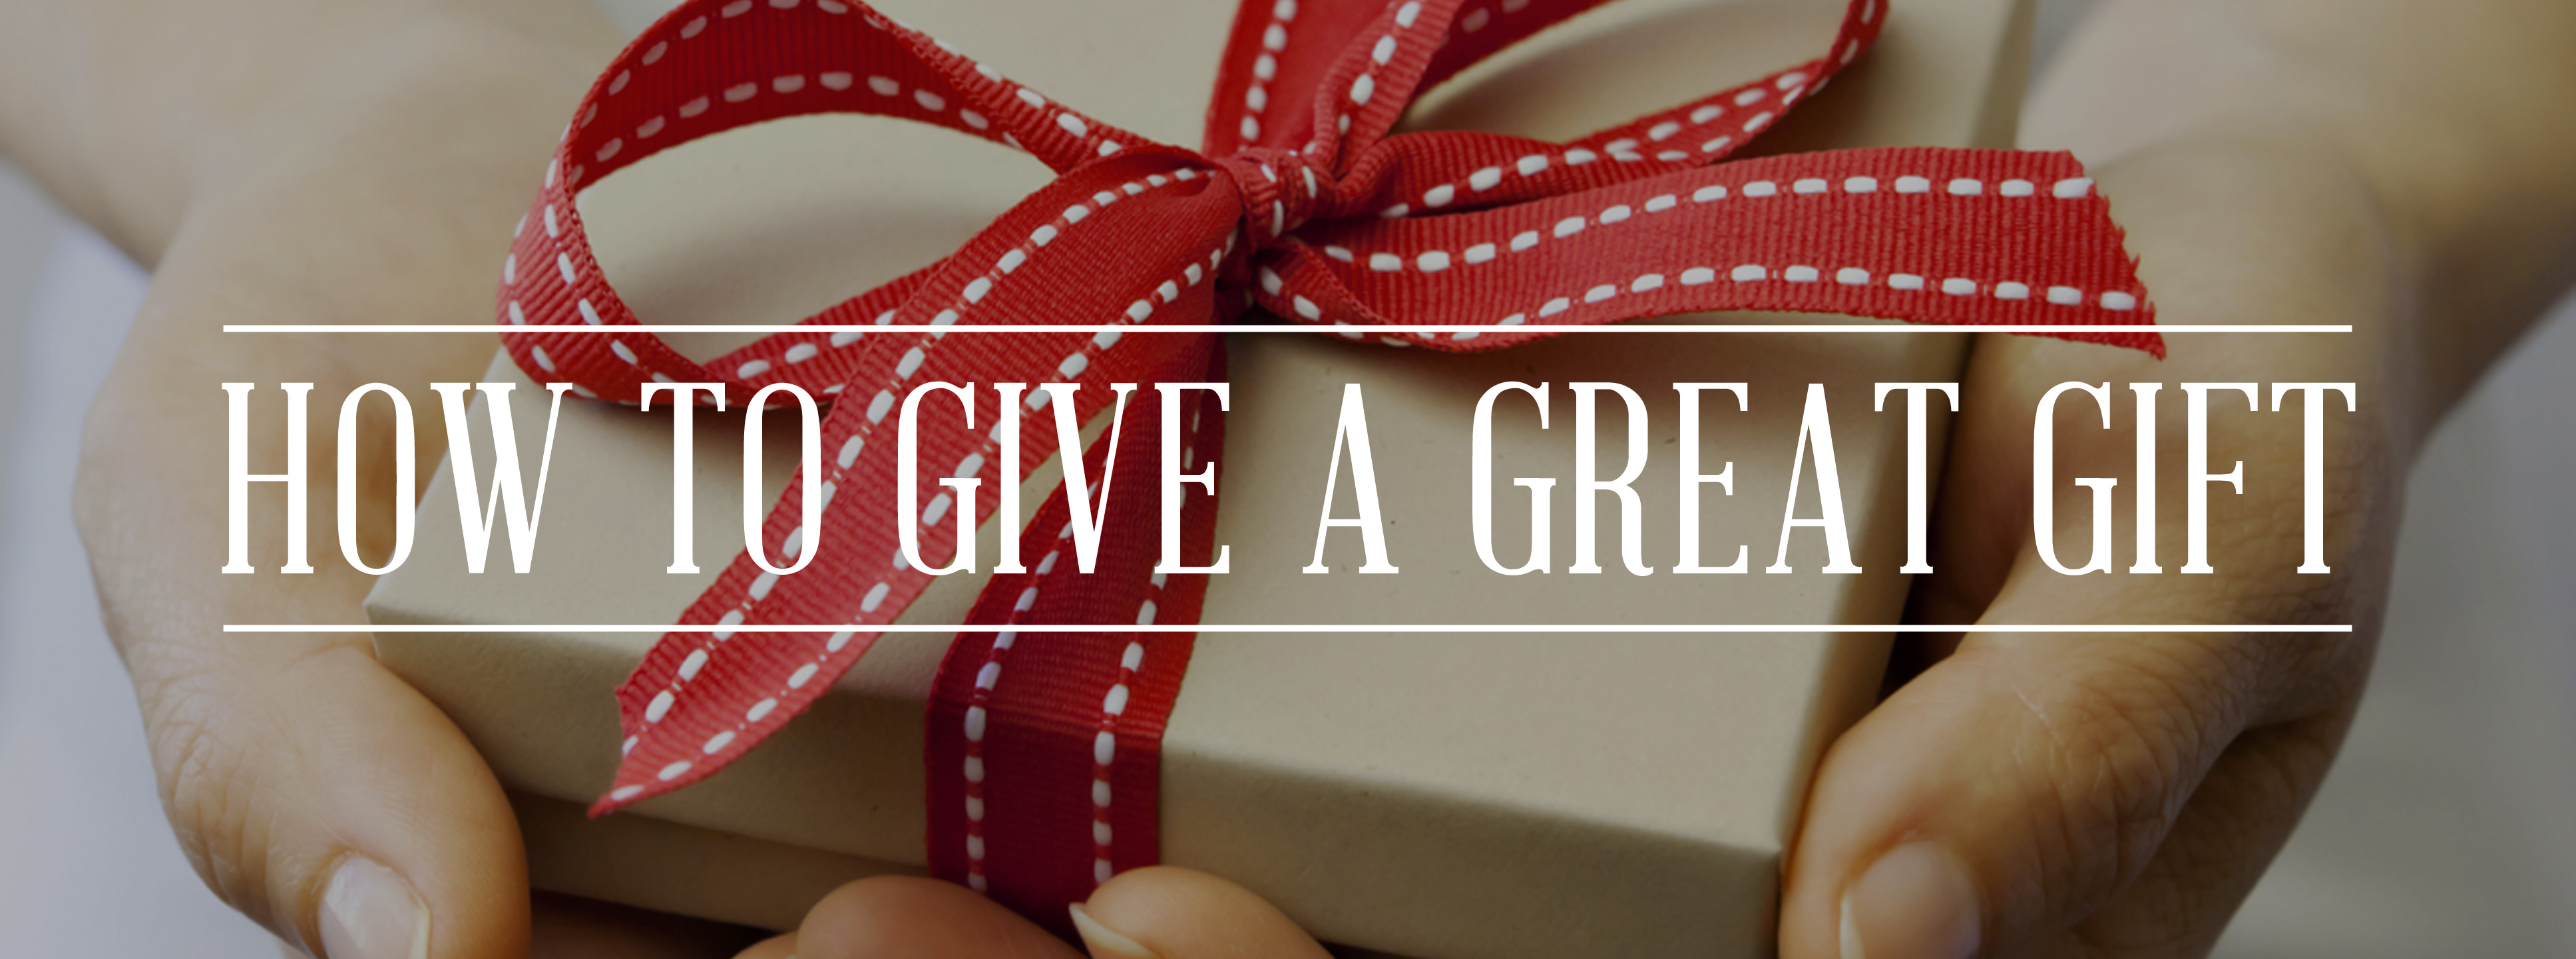 https://www.gentlemansgazette.com/wp-content/uploads/2017/02/how-to-give-a-great-gift.jpg